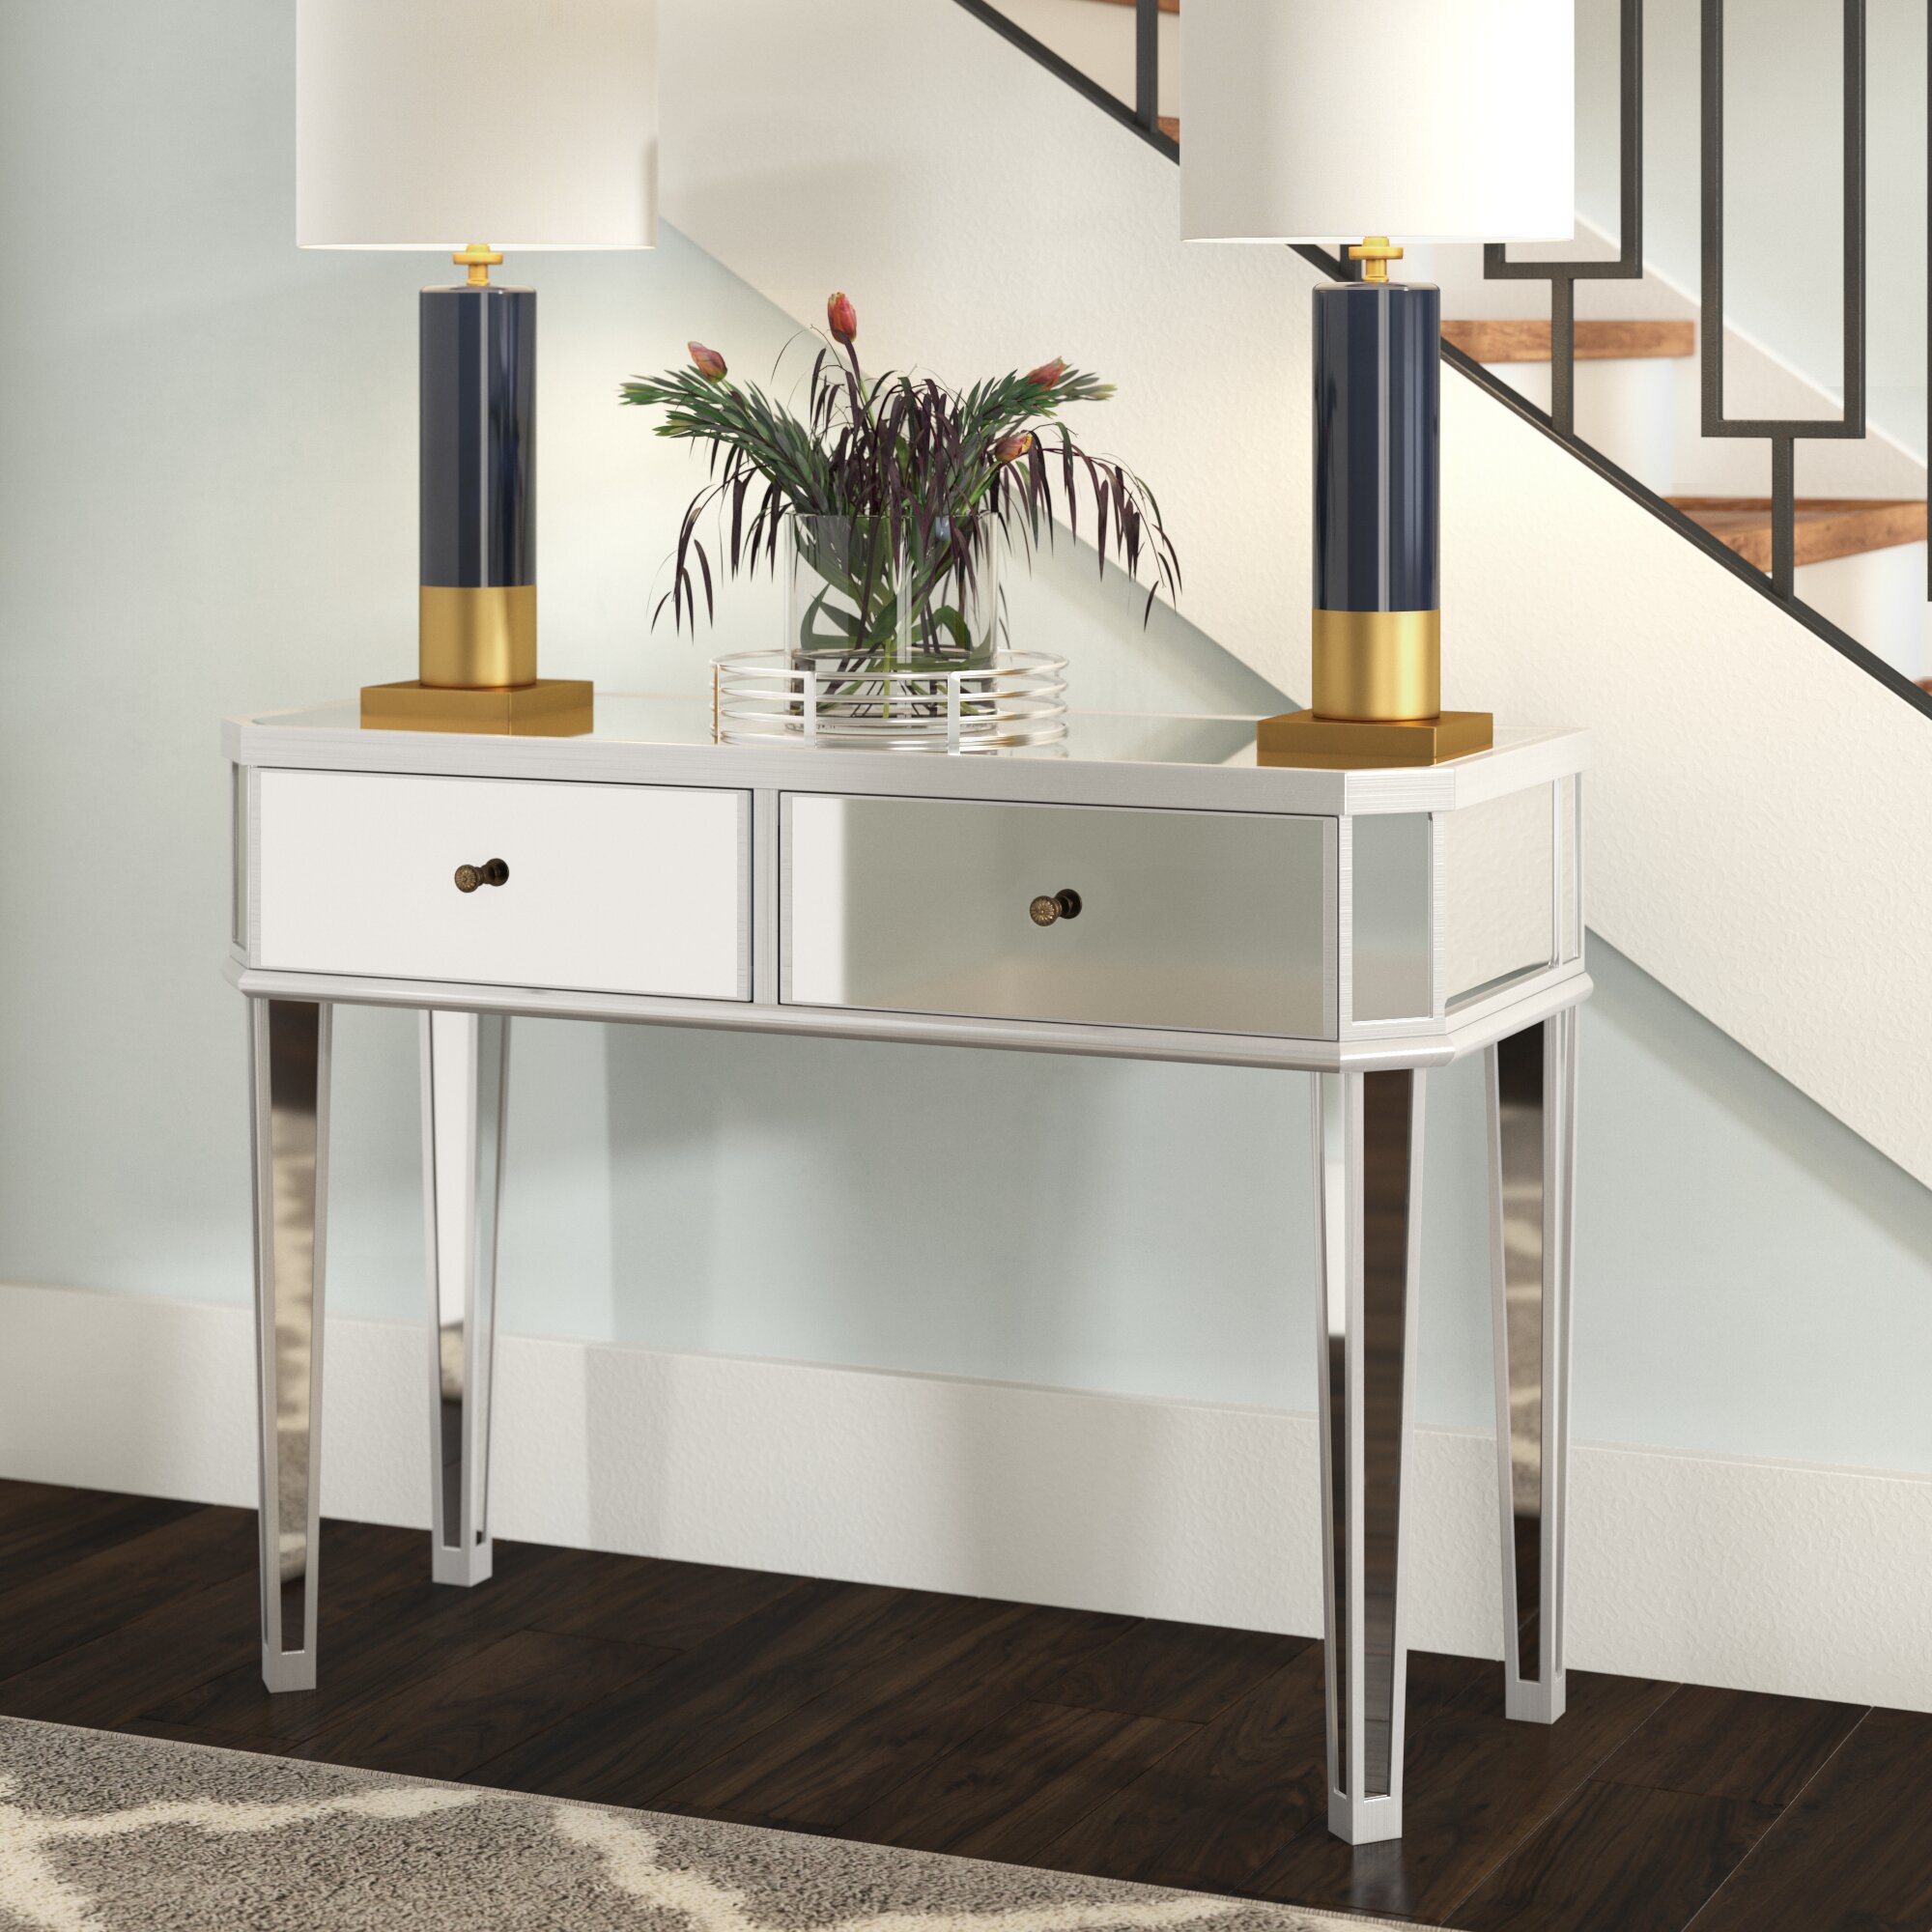 Modern Hallway or Bedroom Furniture Mirror Tiled Border with Angled Legs Mirrored Console Table